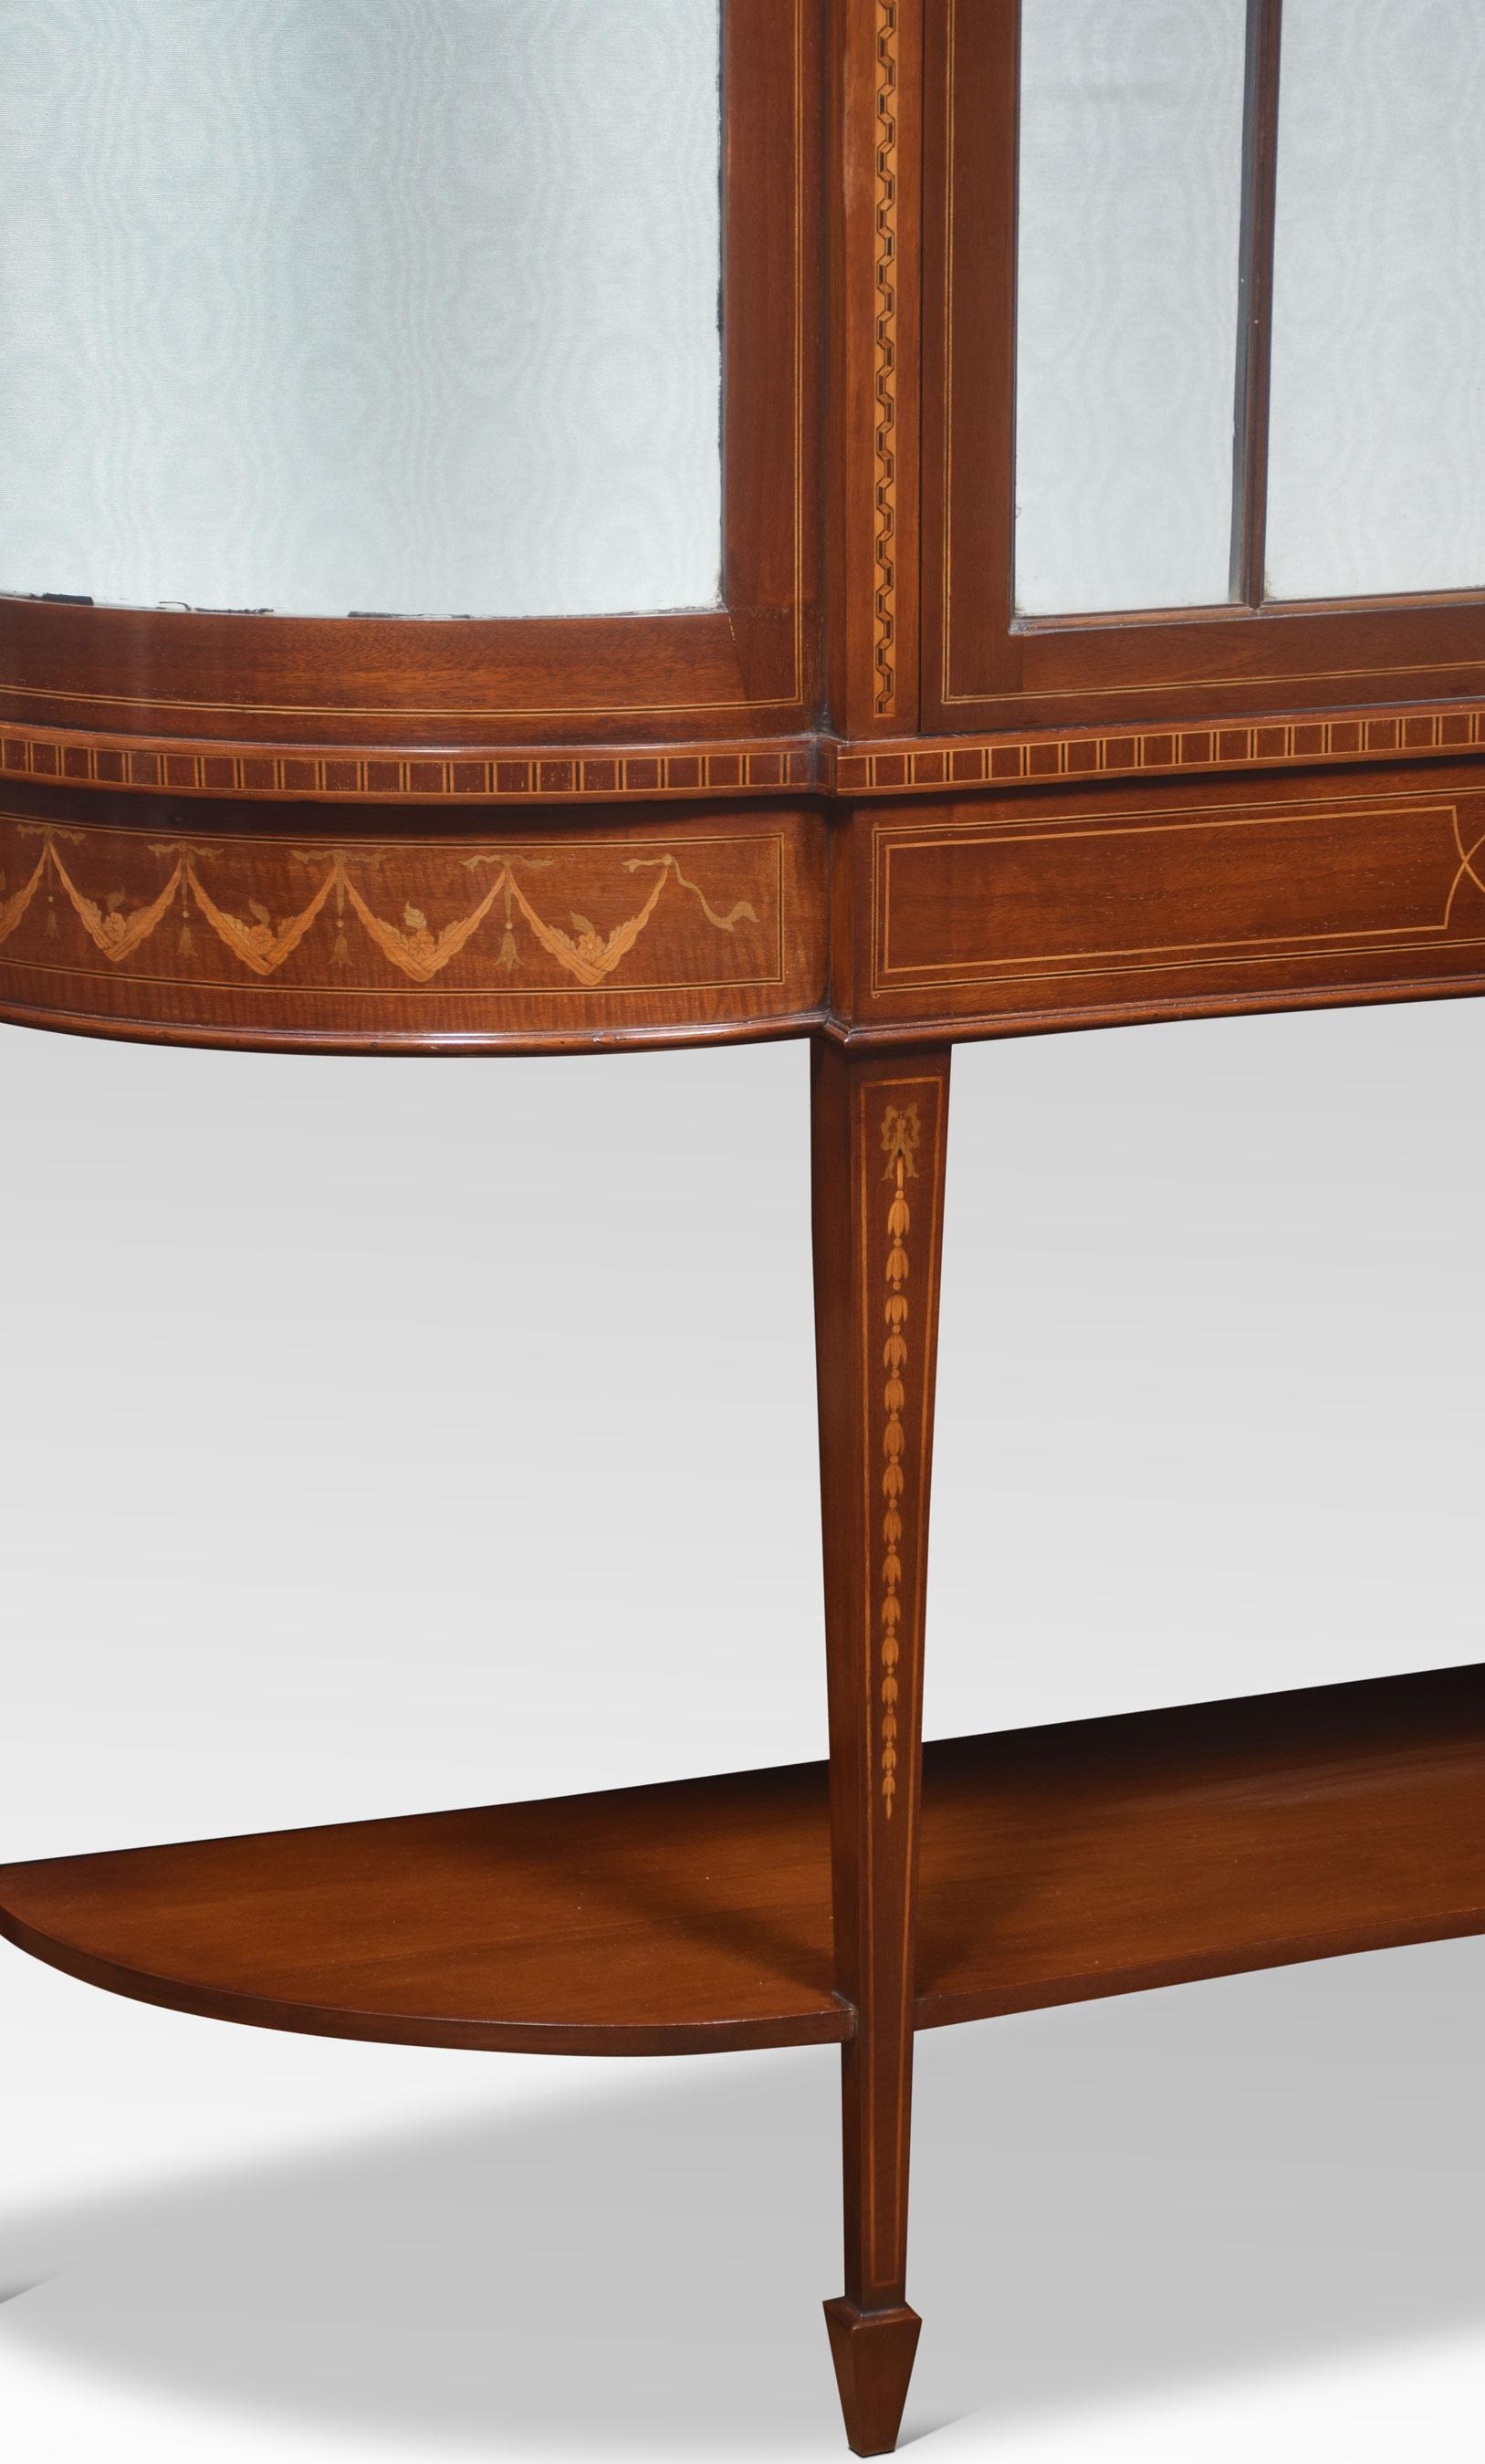 20th Century Mahogany Inlaid Bow Fronted Display Cabinet